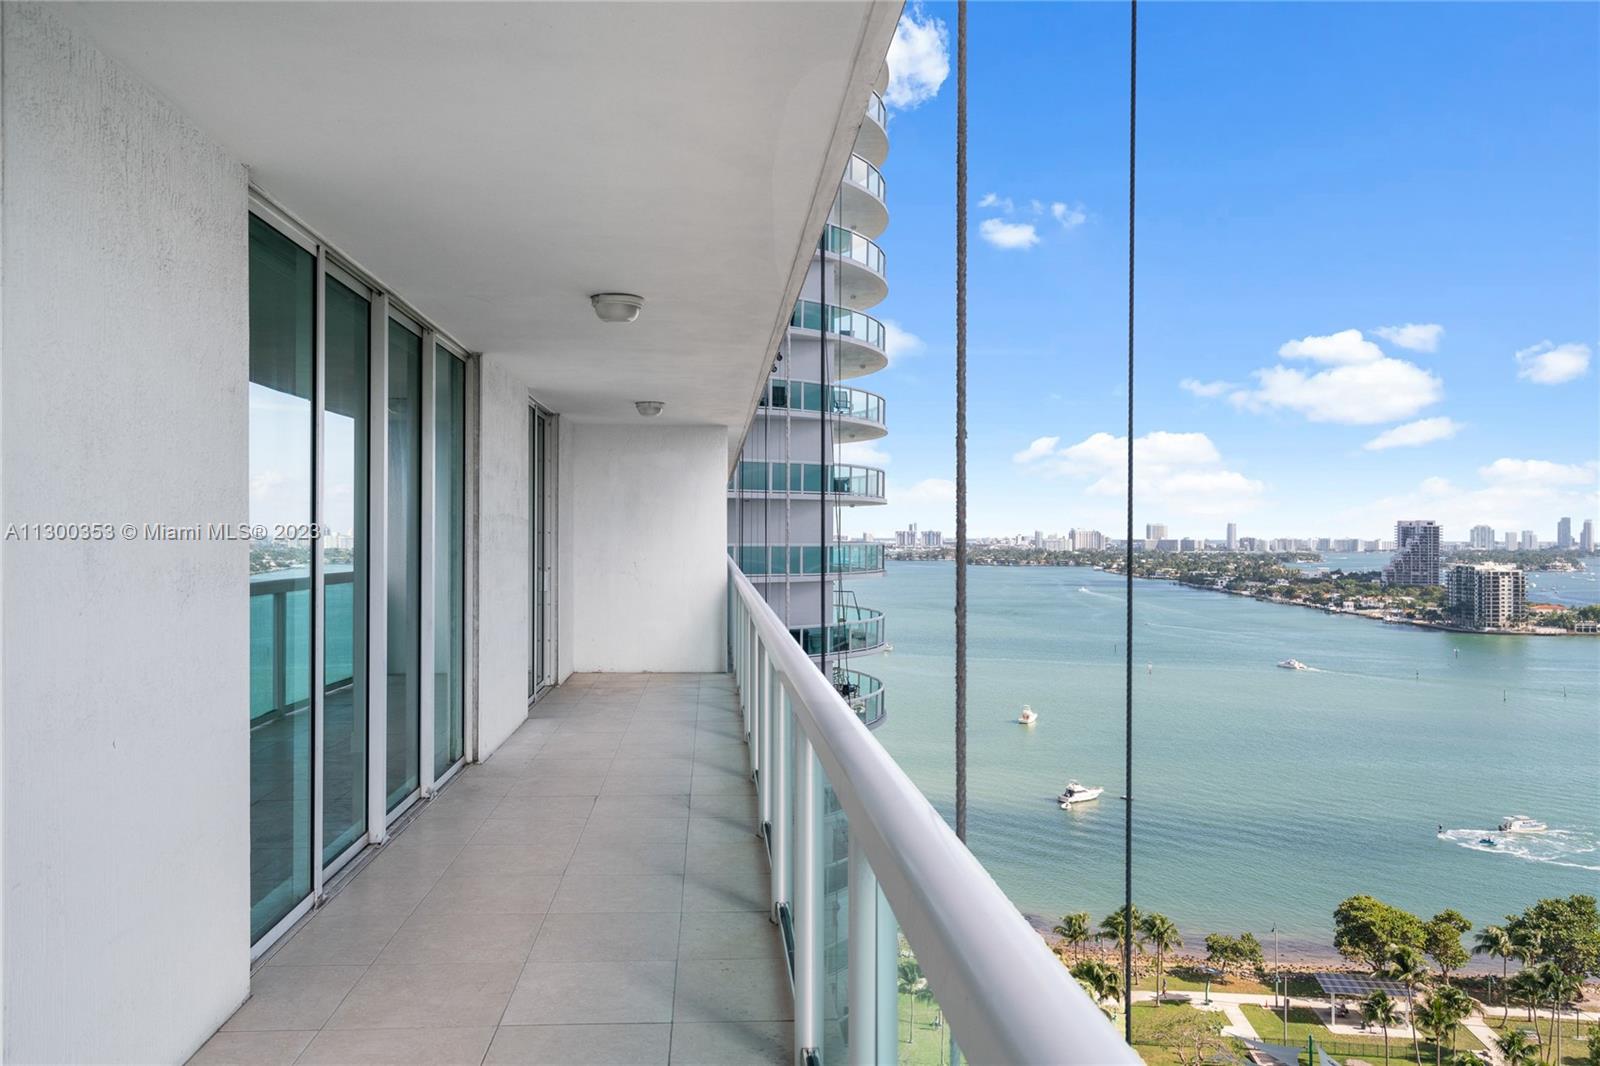 Enjoy Bay & City views from this 2 bed / 2 baths unit featuring a split floor plan, two master bedrooms with walk-in closets, tile flooring throughout and marble in bathrooms. 1800 Club Miami offers a variety of amenities for its residents, including a state-of-the-art fitness center, co-ed sauna and steam room, massage room, heated swimming pool, hot tub, party room, 24-hour concierge, 24-hour security, and 24-hour valet parking. 1800 Club is located directly across the street from Margaret Pace Park which has tennis courts, a basketball court, a children’s playground, a volleyball court, a dog park, and tons of open green space .